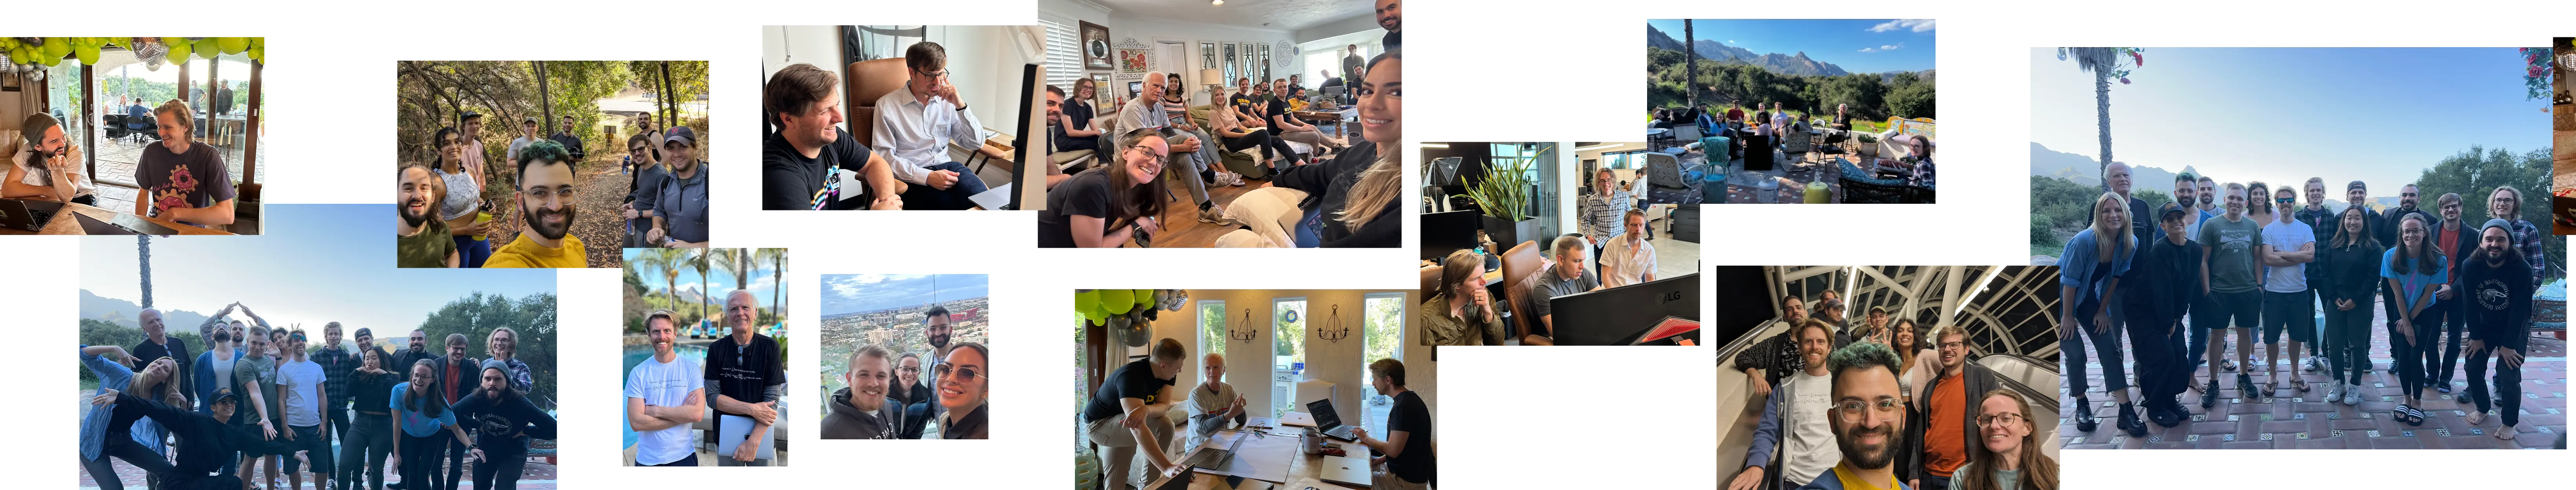 A collage of images from our team hanging out together, some goofy and some with us collaborating on work problems. Most are from our first team retreat (KittyCAMP) that took place October 2023 in Malibu, California.